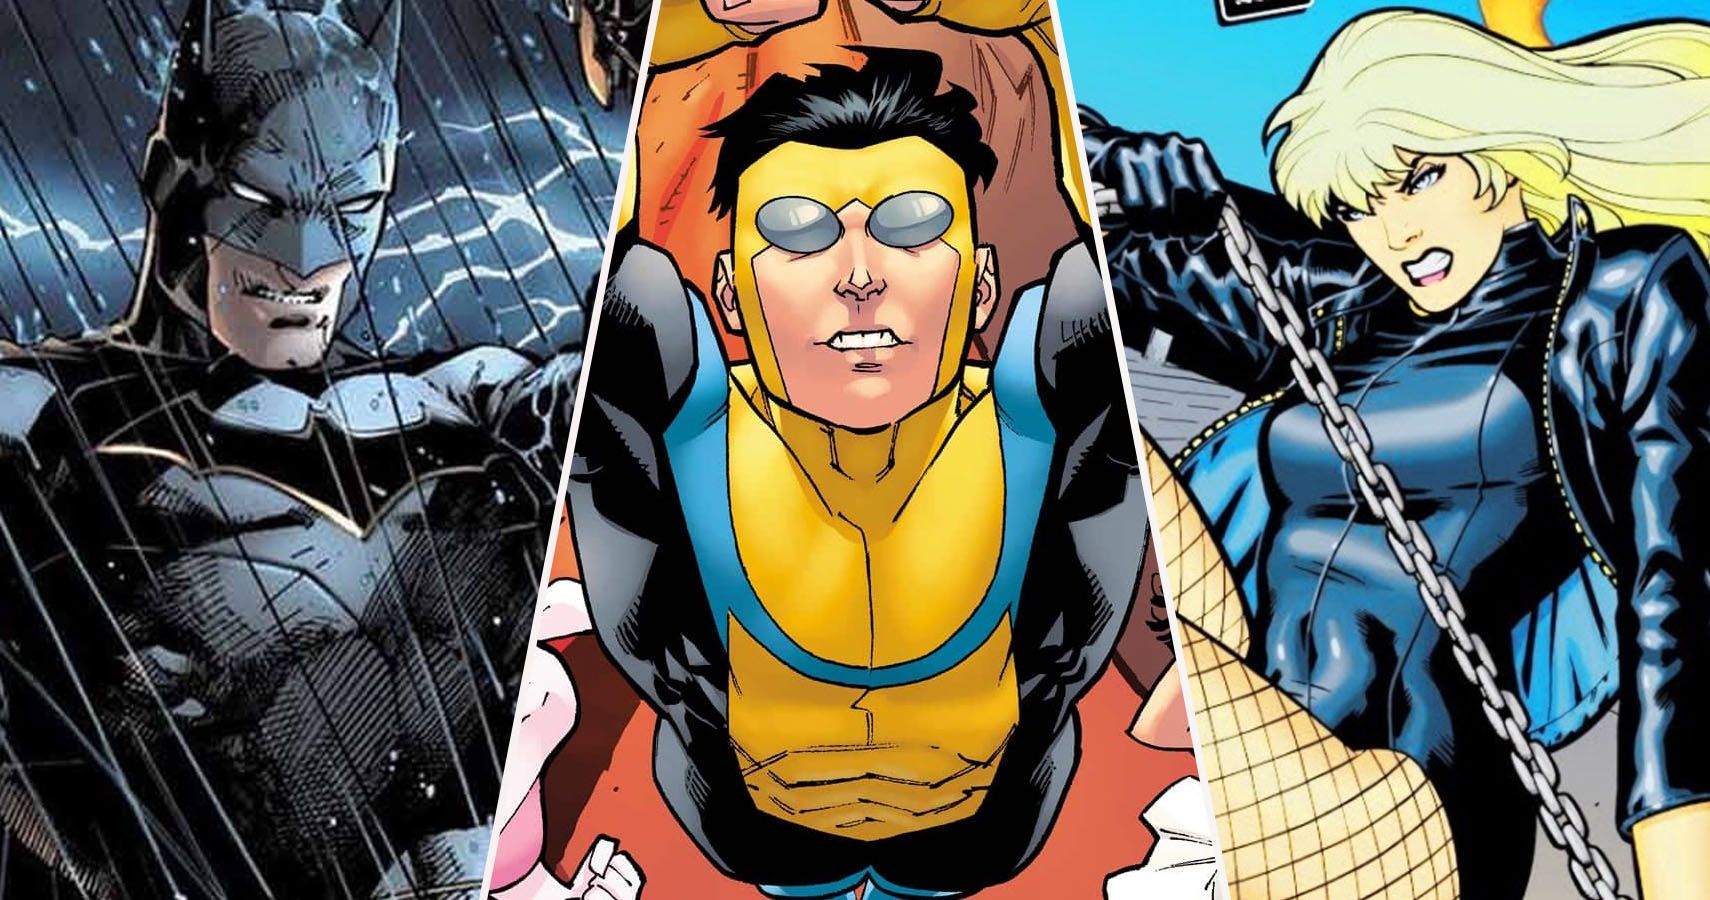 Is Invincible from Marvel or DC? - Dexerto